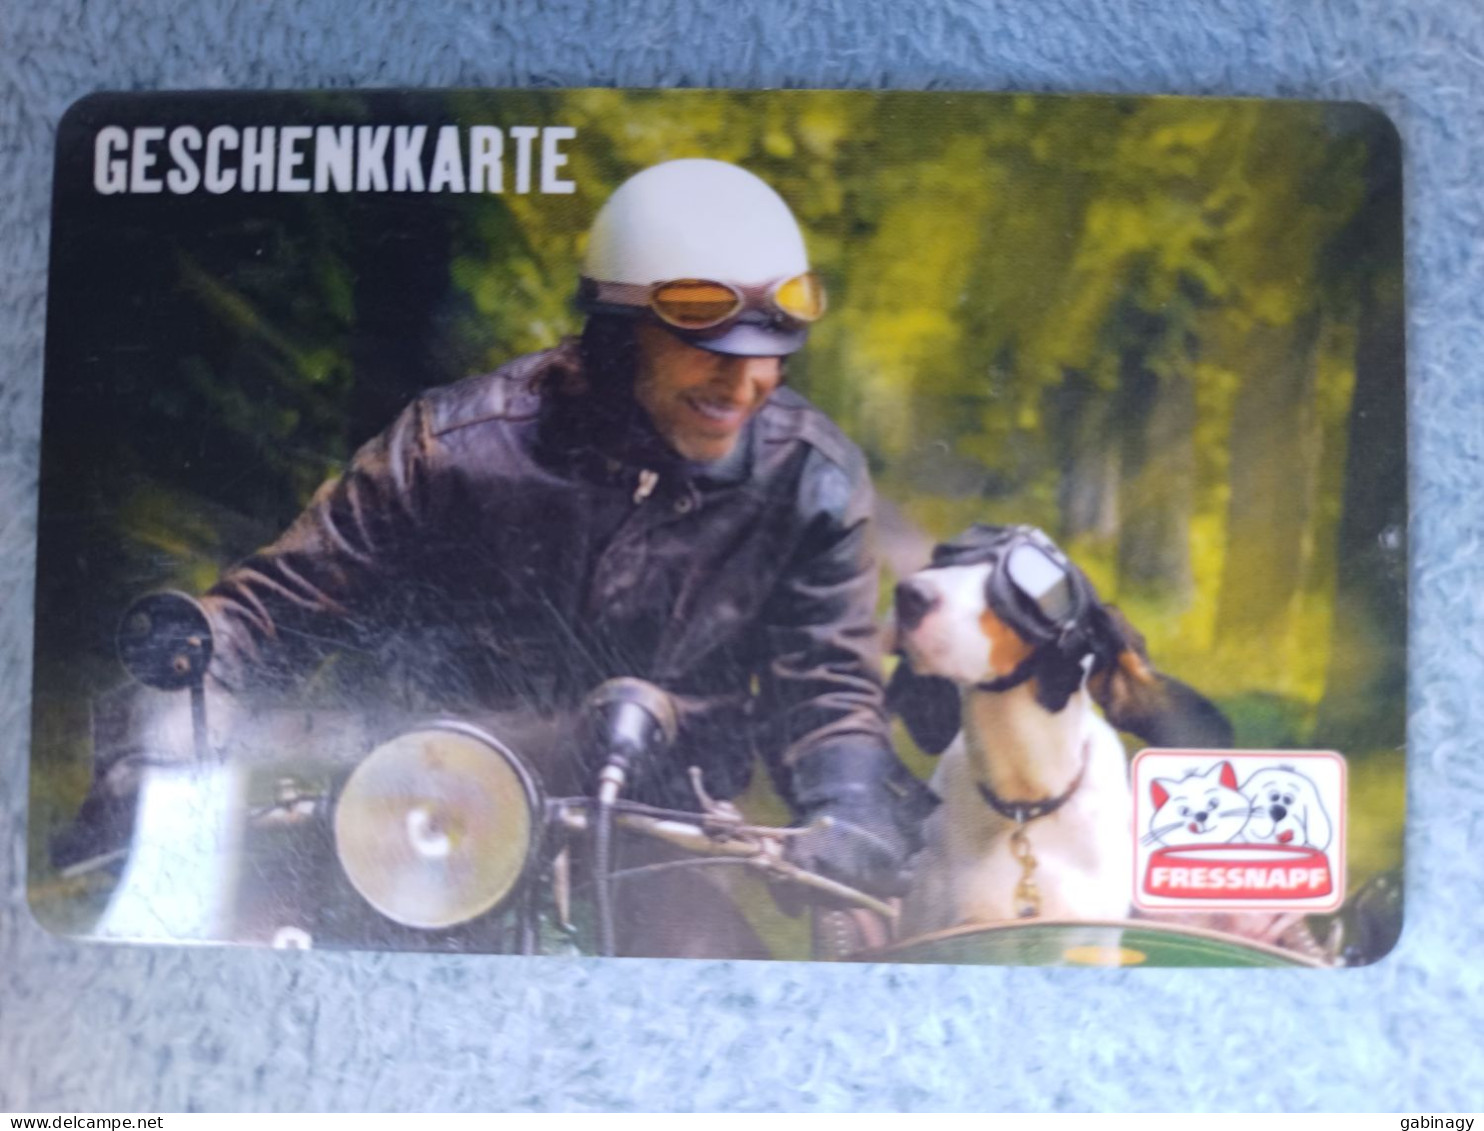 GIFT CARD - GERMANY - FRESSNAPF 02 - DOG - Cartes Cadeaux